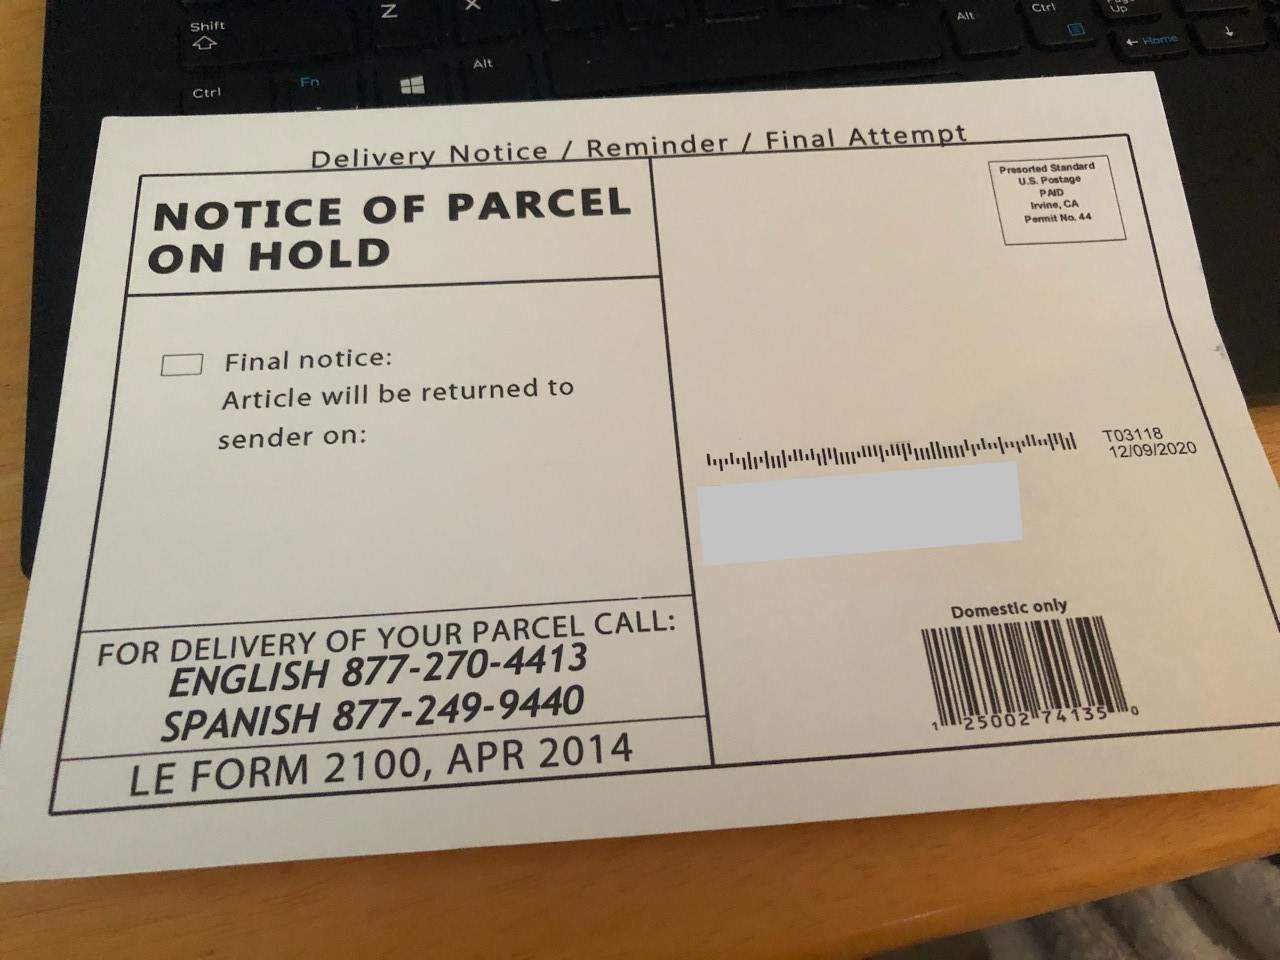 ’Parcel on hold’ scheme may be targeting your bank account